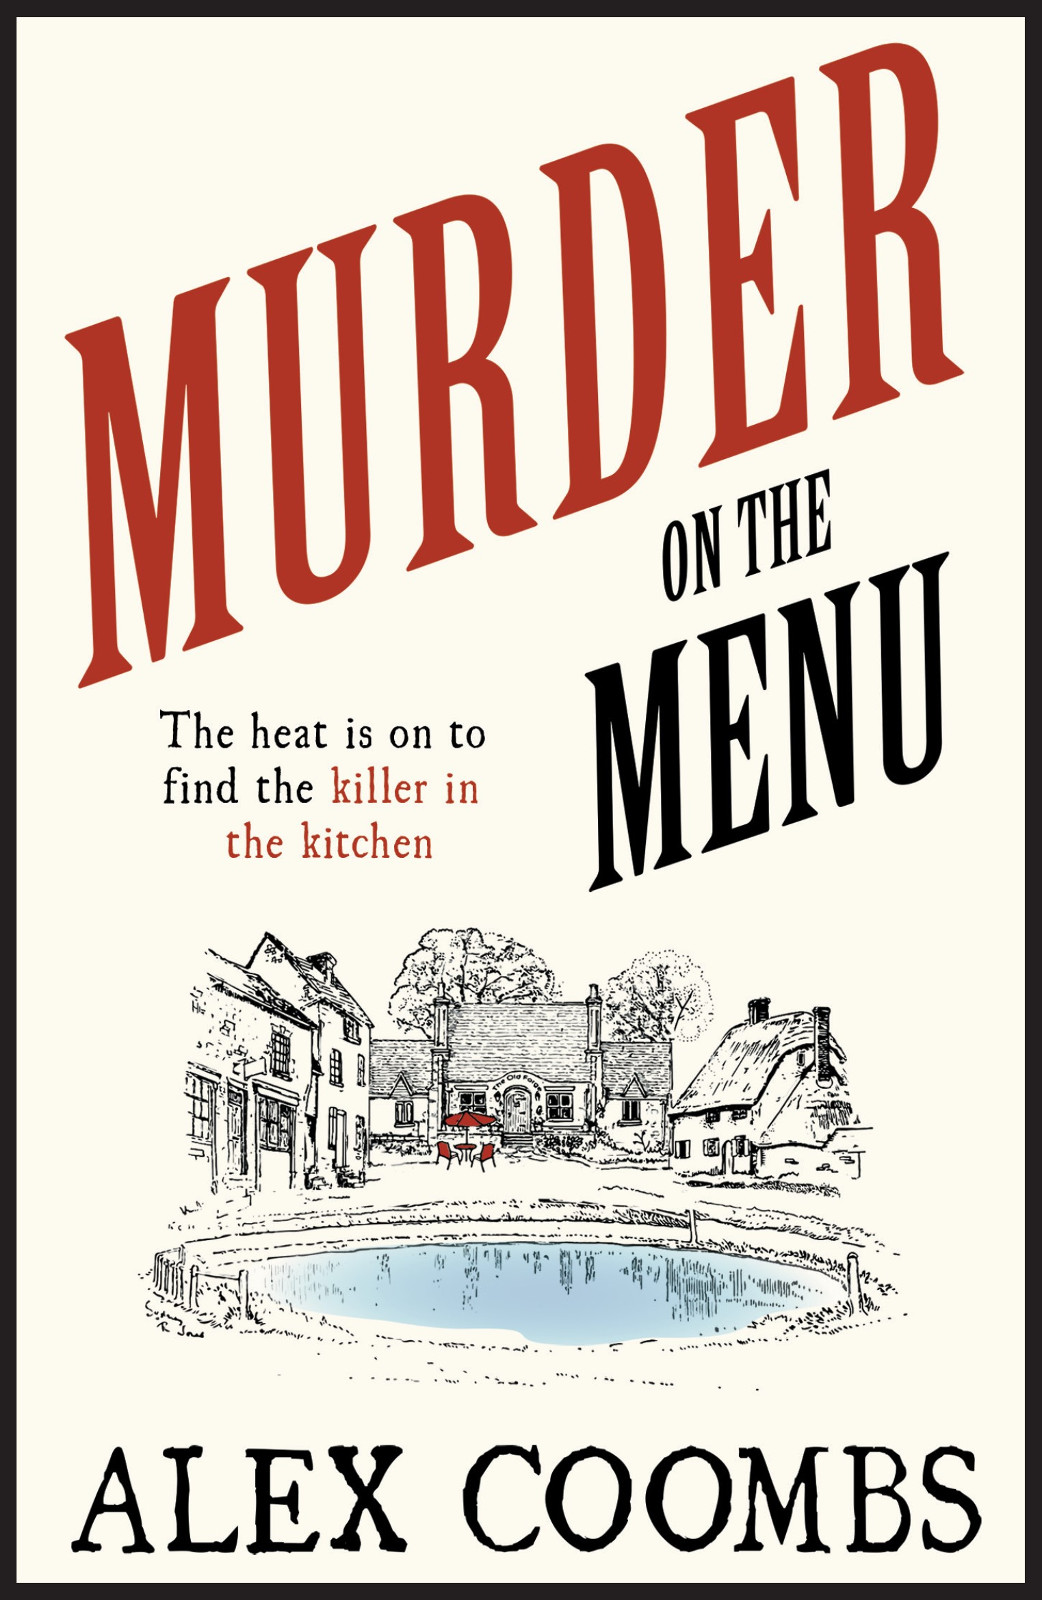 Murder on the Menu by Alex Coombs